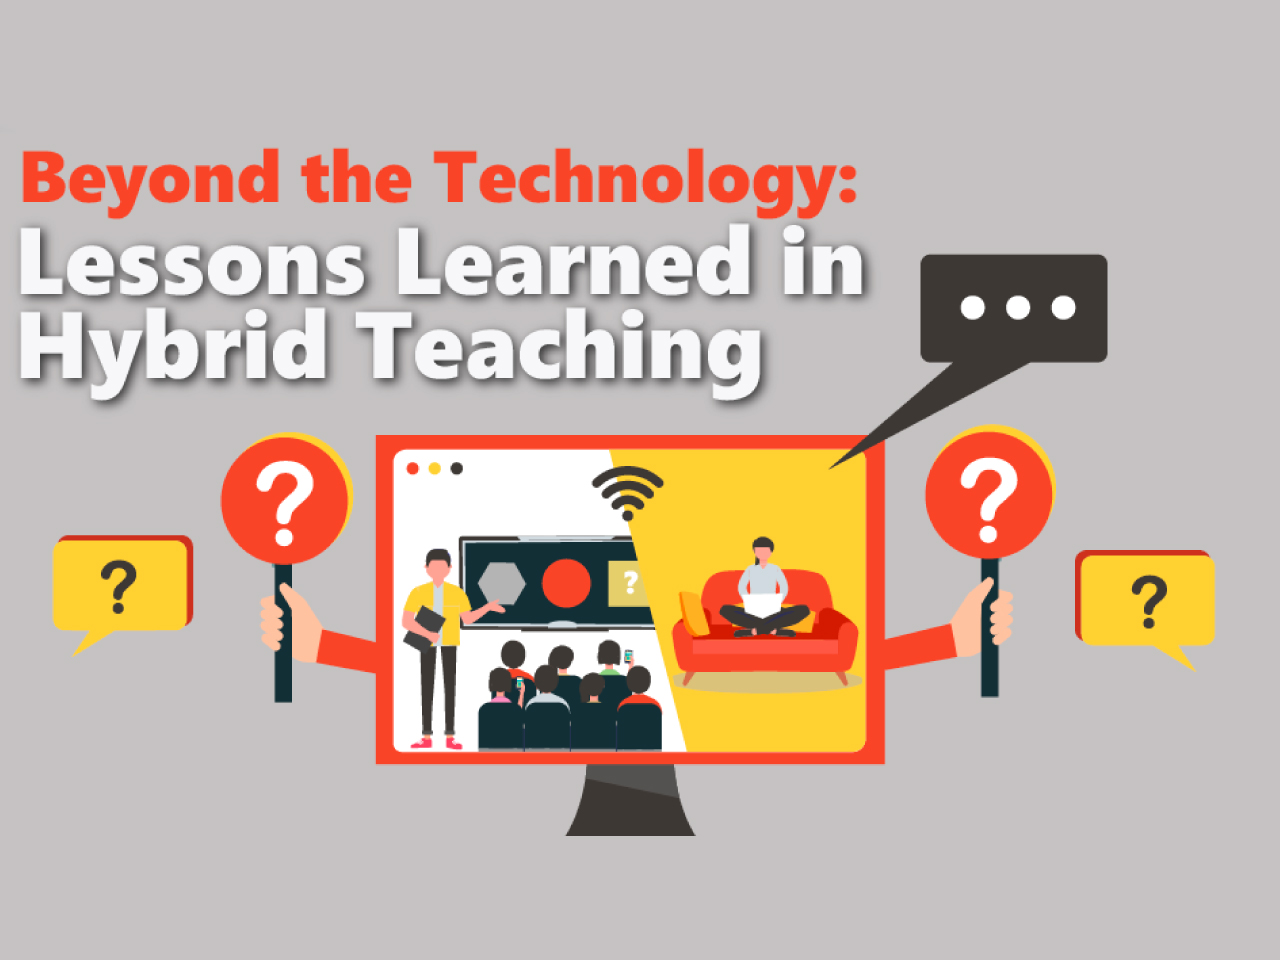 Beyond the Technology - Lessons Learned in Hybrid Teaching: 28 October